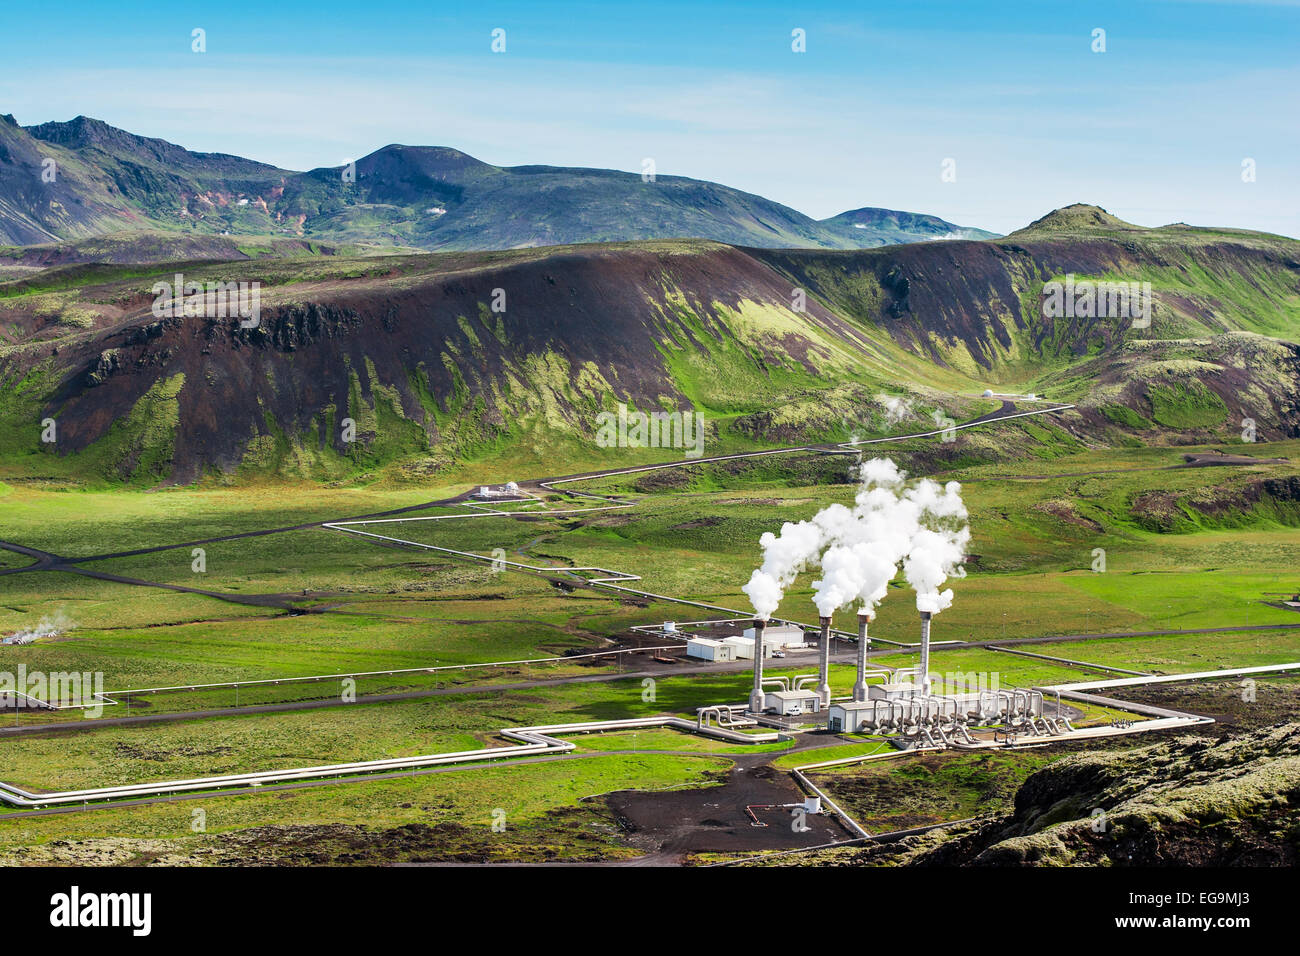 Nesjavellir Power Plant , the largest geothermal power plant in Iceland. Stock Photo